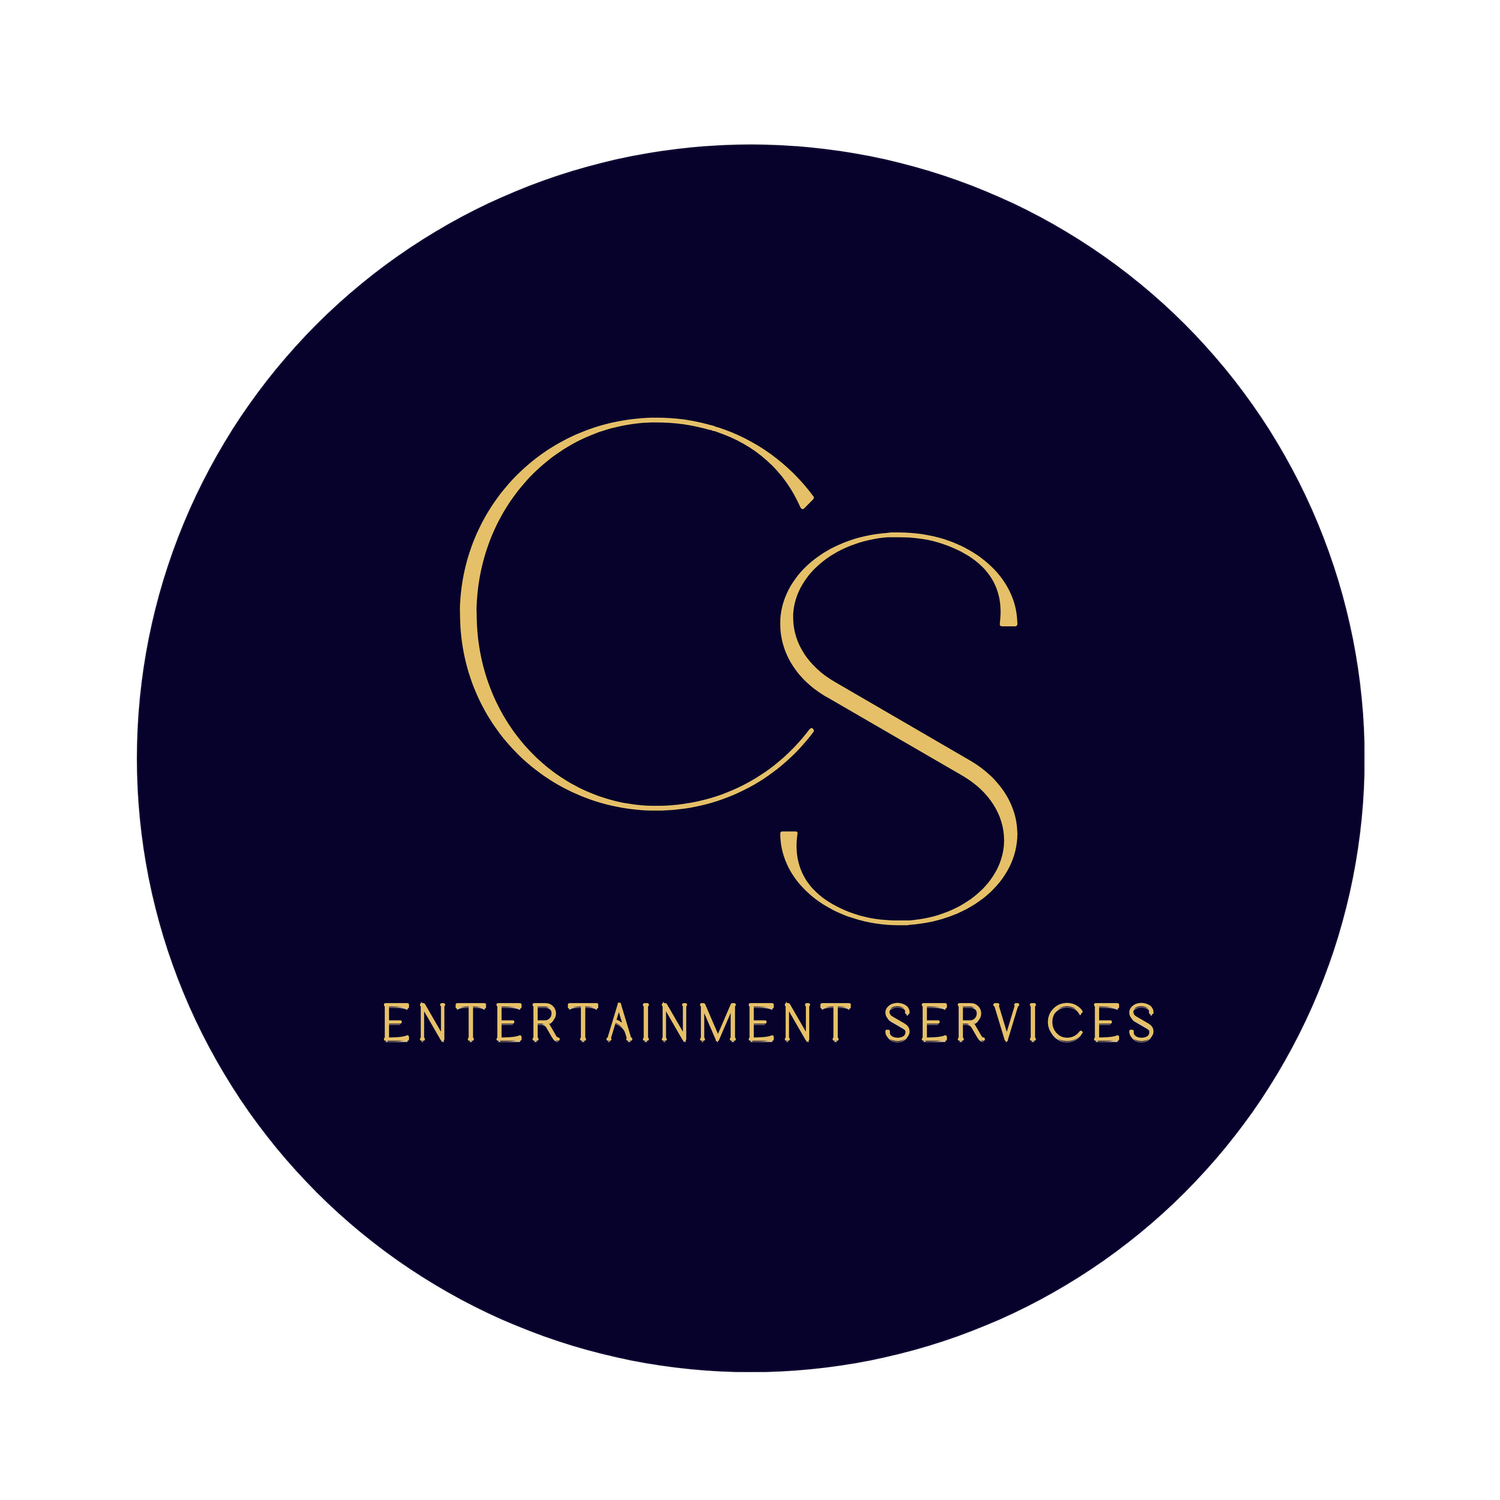 London-based CS Entertainment DJ &amp; Photo Booth rentals are perfect perfect for corporate events, weddings, and parties. Our DJ services boast speakers and lighting, while our Photo Booth rental ensures instant prints, themed props, social sharing, and premium backdrops.